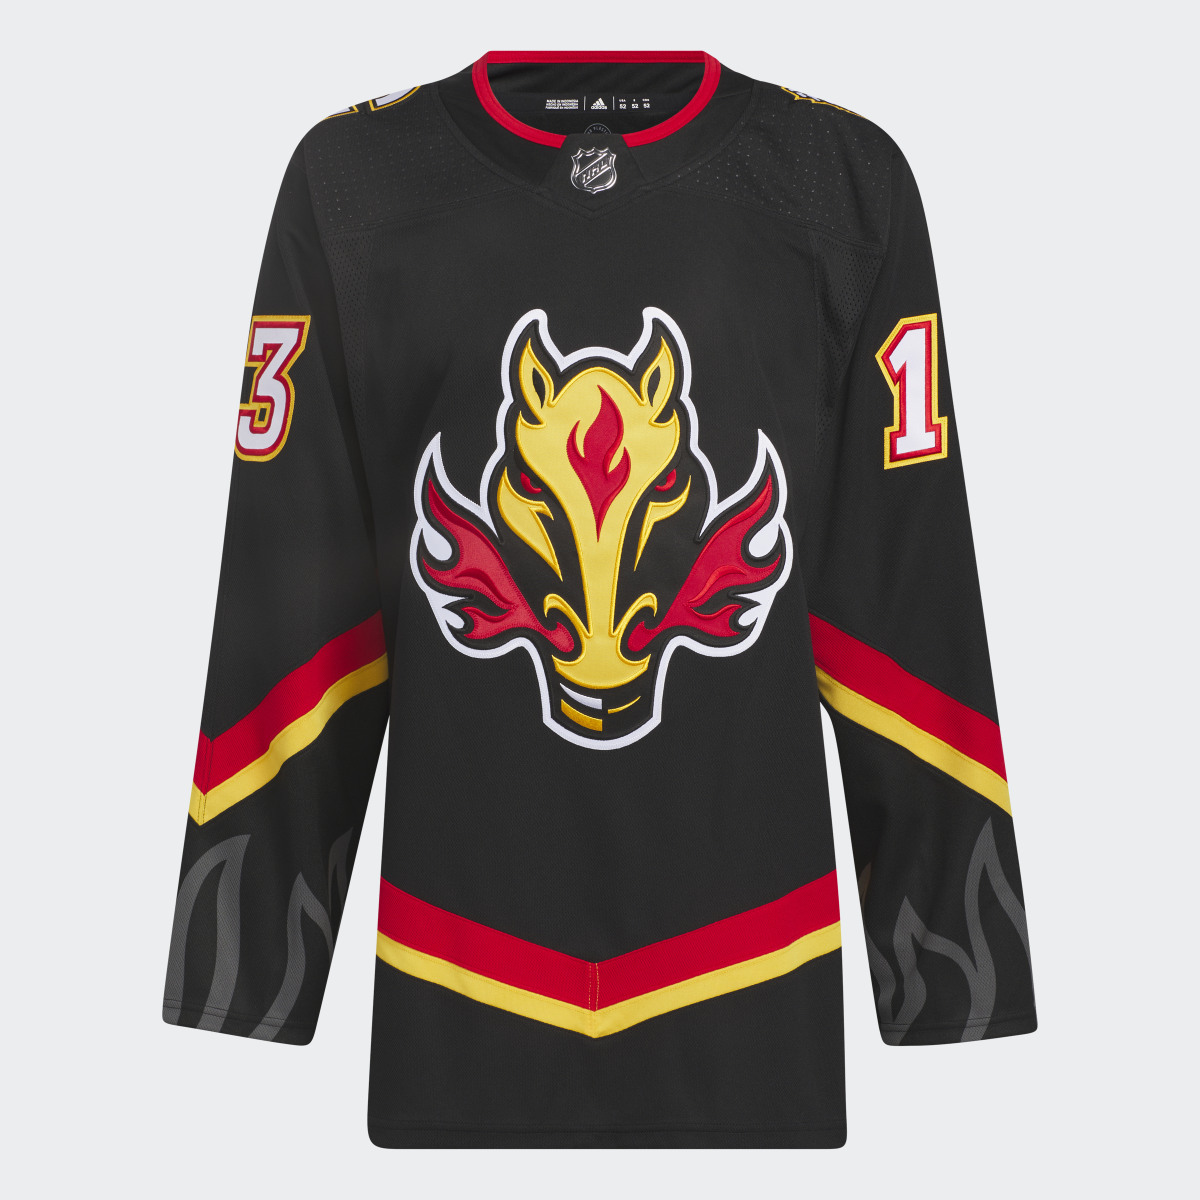 Adidas Flames Gaudreau Third Authentic Jersey. 5